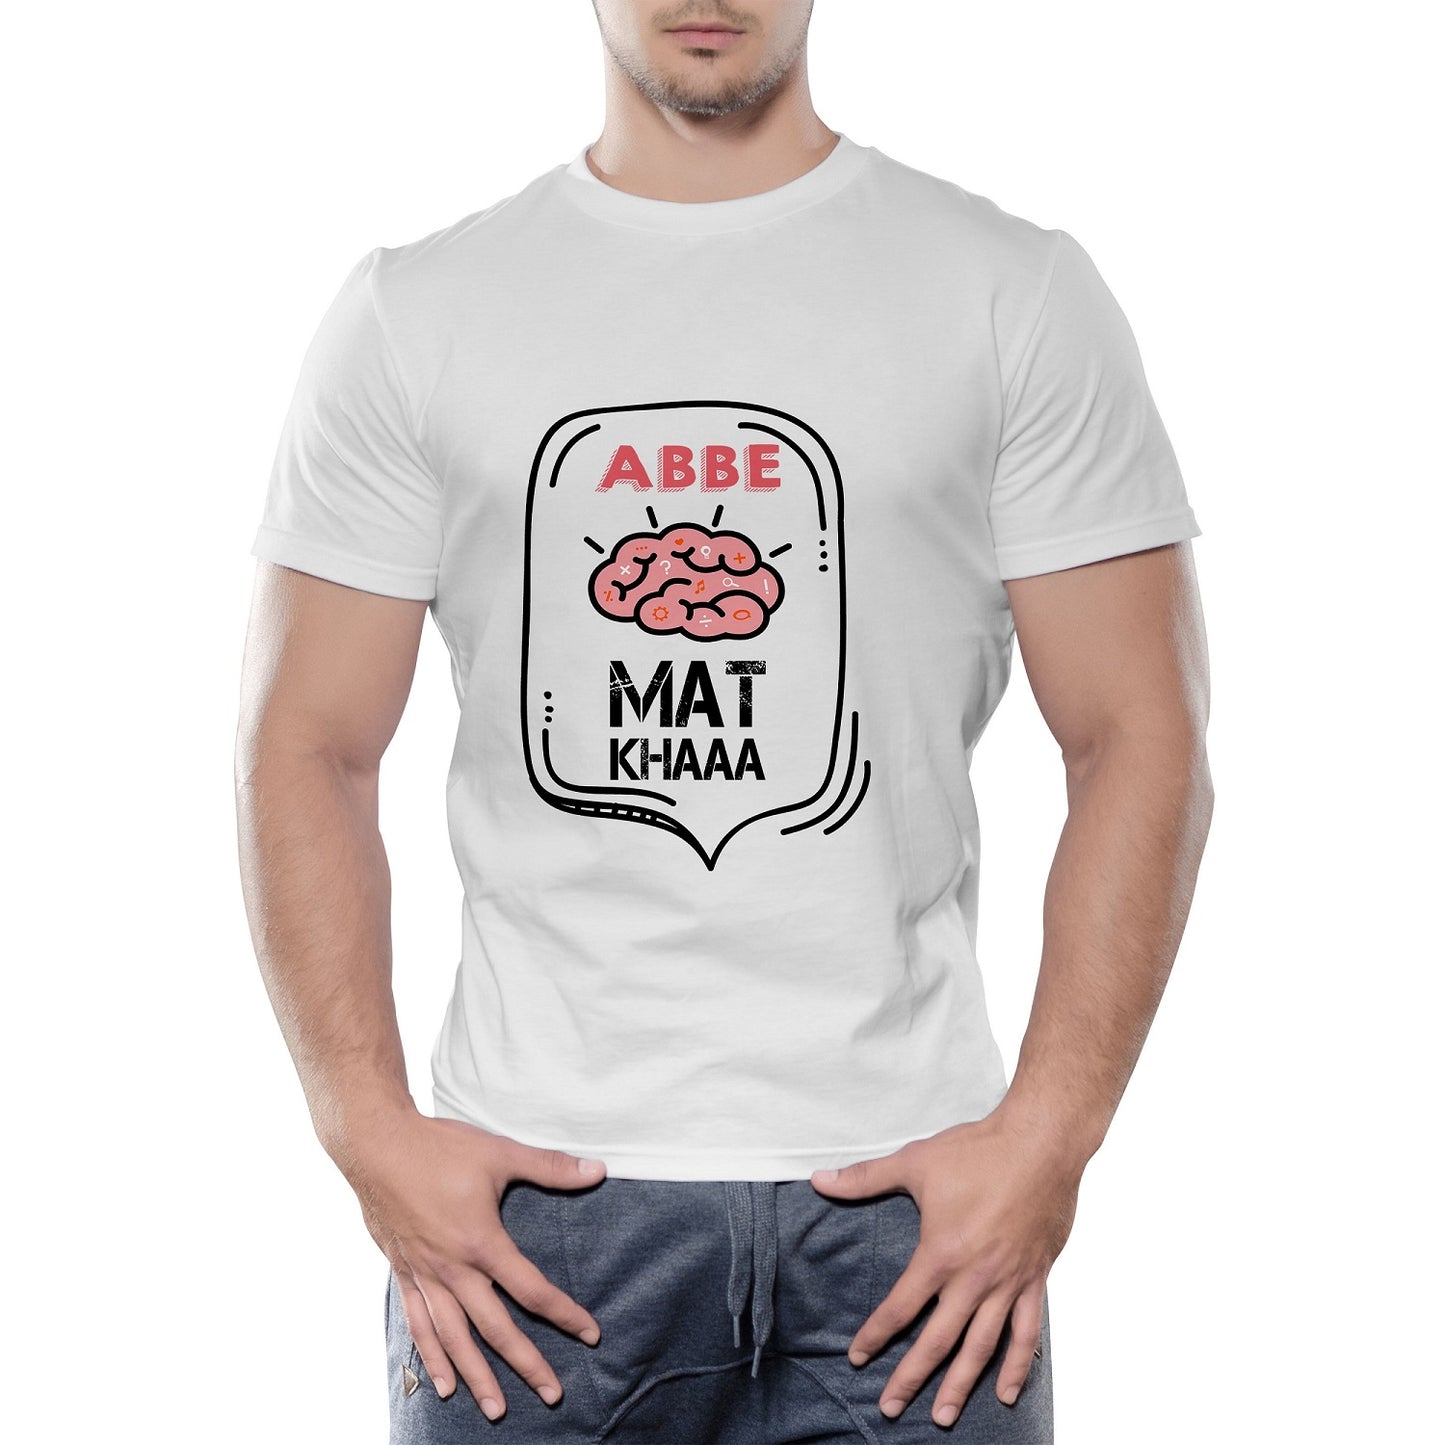 iberry's Printed T-Shirt for Men |Funny Quote Tshirt | Half Sleeve T-Shirt | Round Neck T Shirt |Cotton T-Shirt for Men- Dimag mat khaa